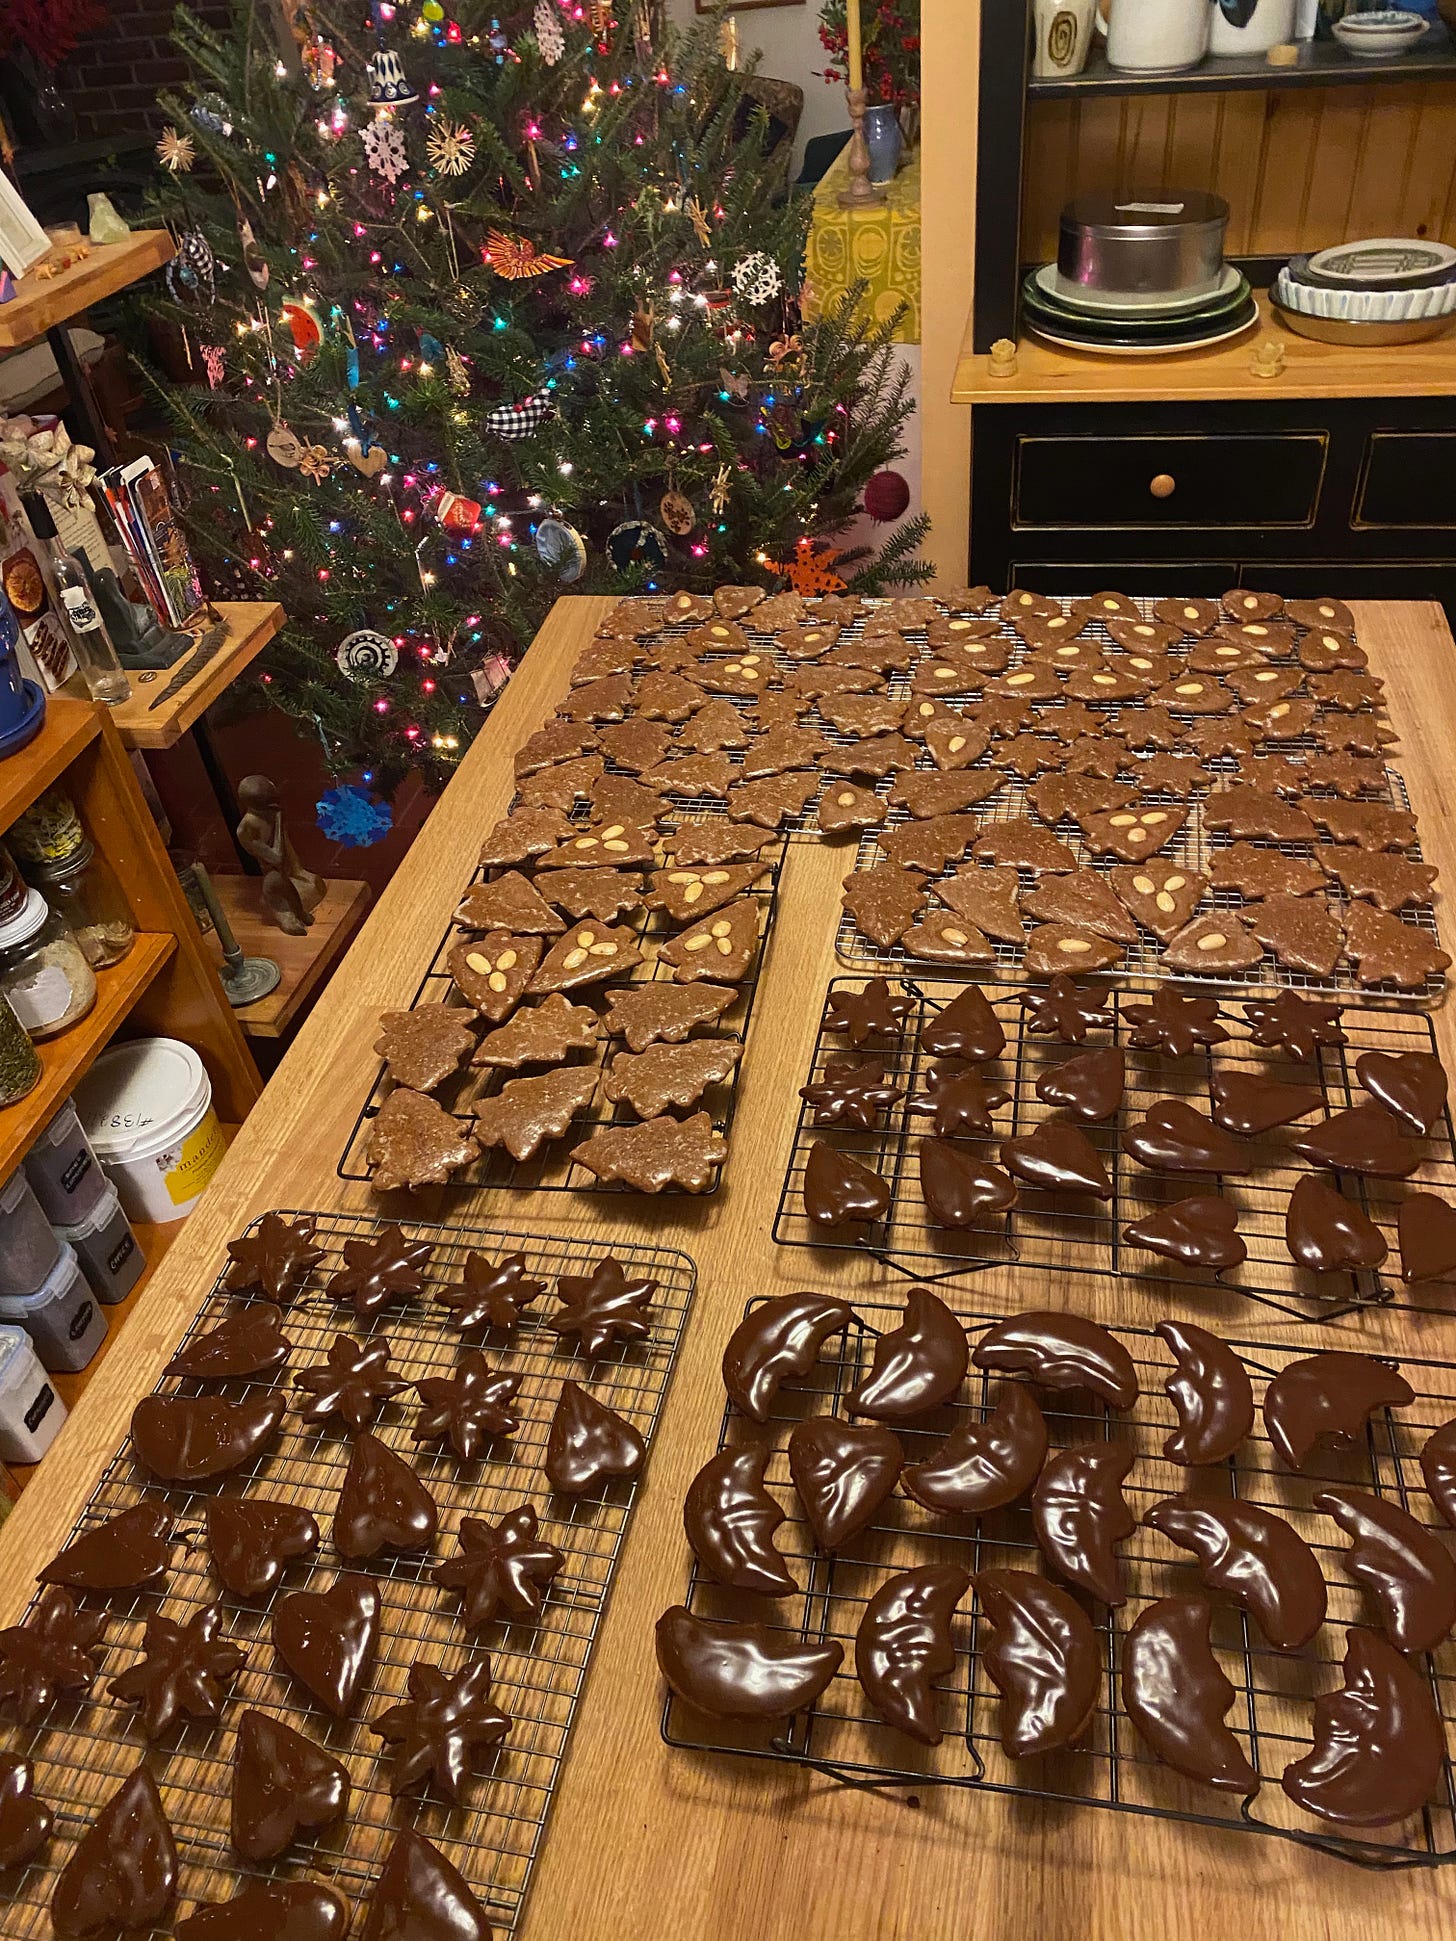 150+ gingerbread cookies, some dipped in chocolate, spread out on cooling racks on a kitchen island. A decorated Christams tree is visible in the background.